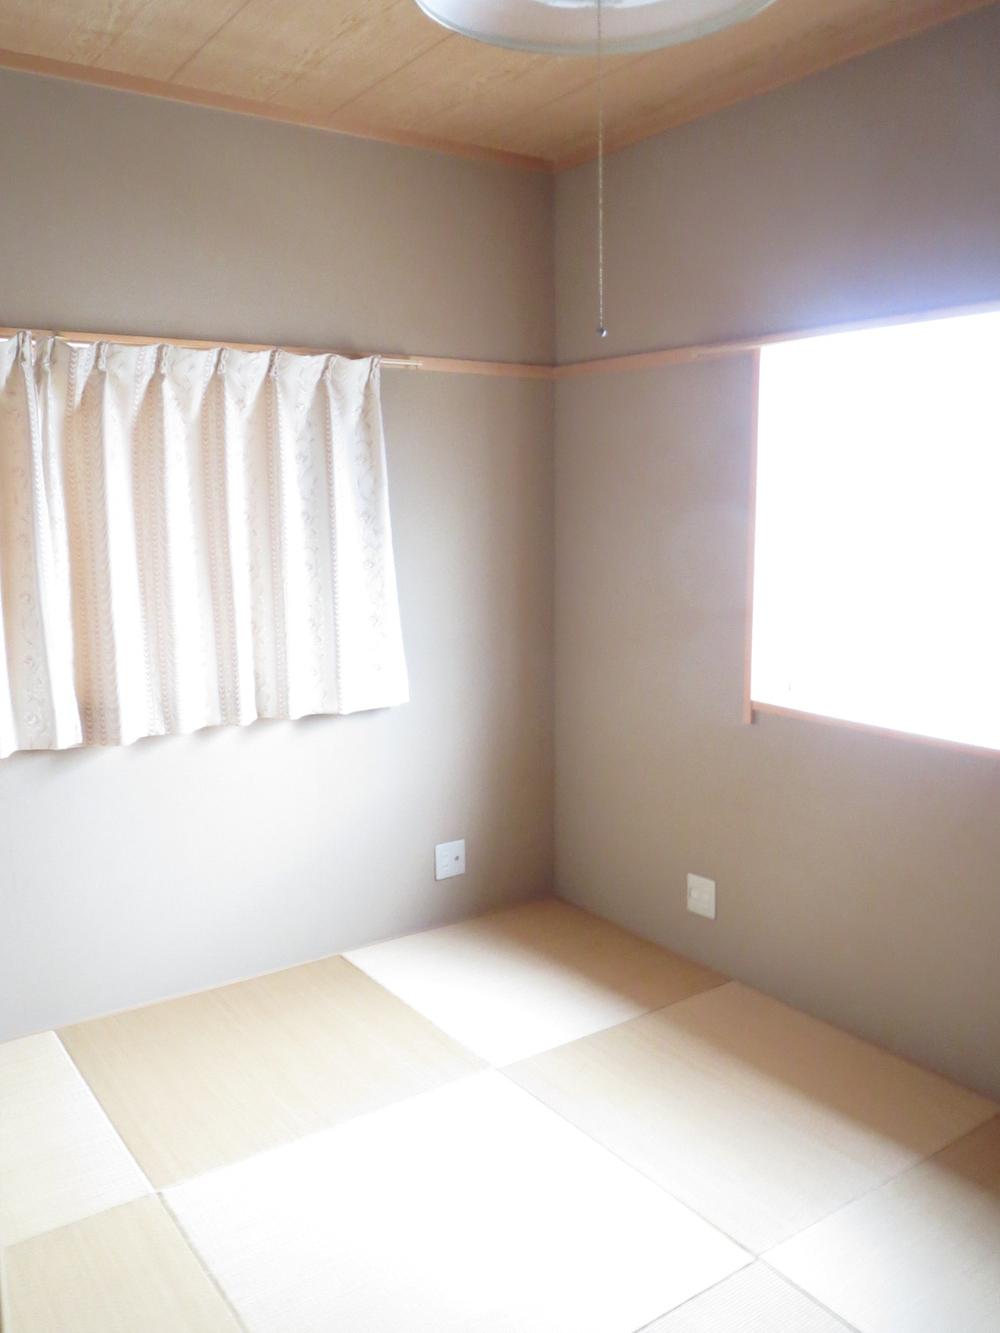 Non-living room. Third floor: Japanese-style room